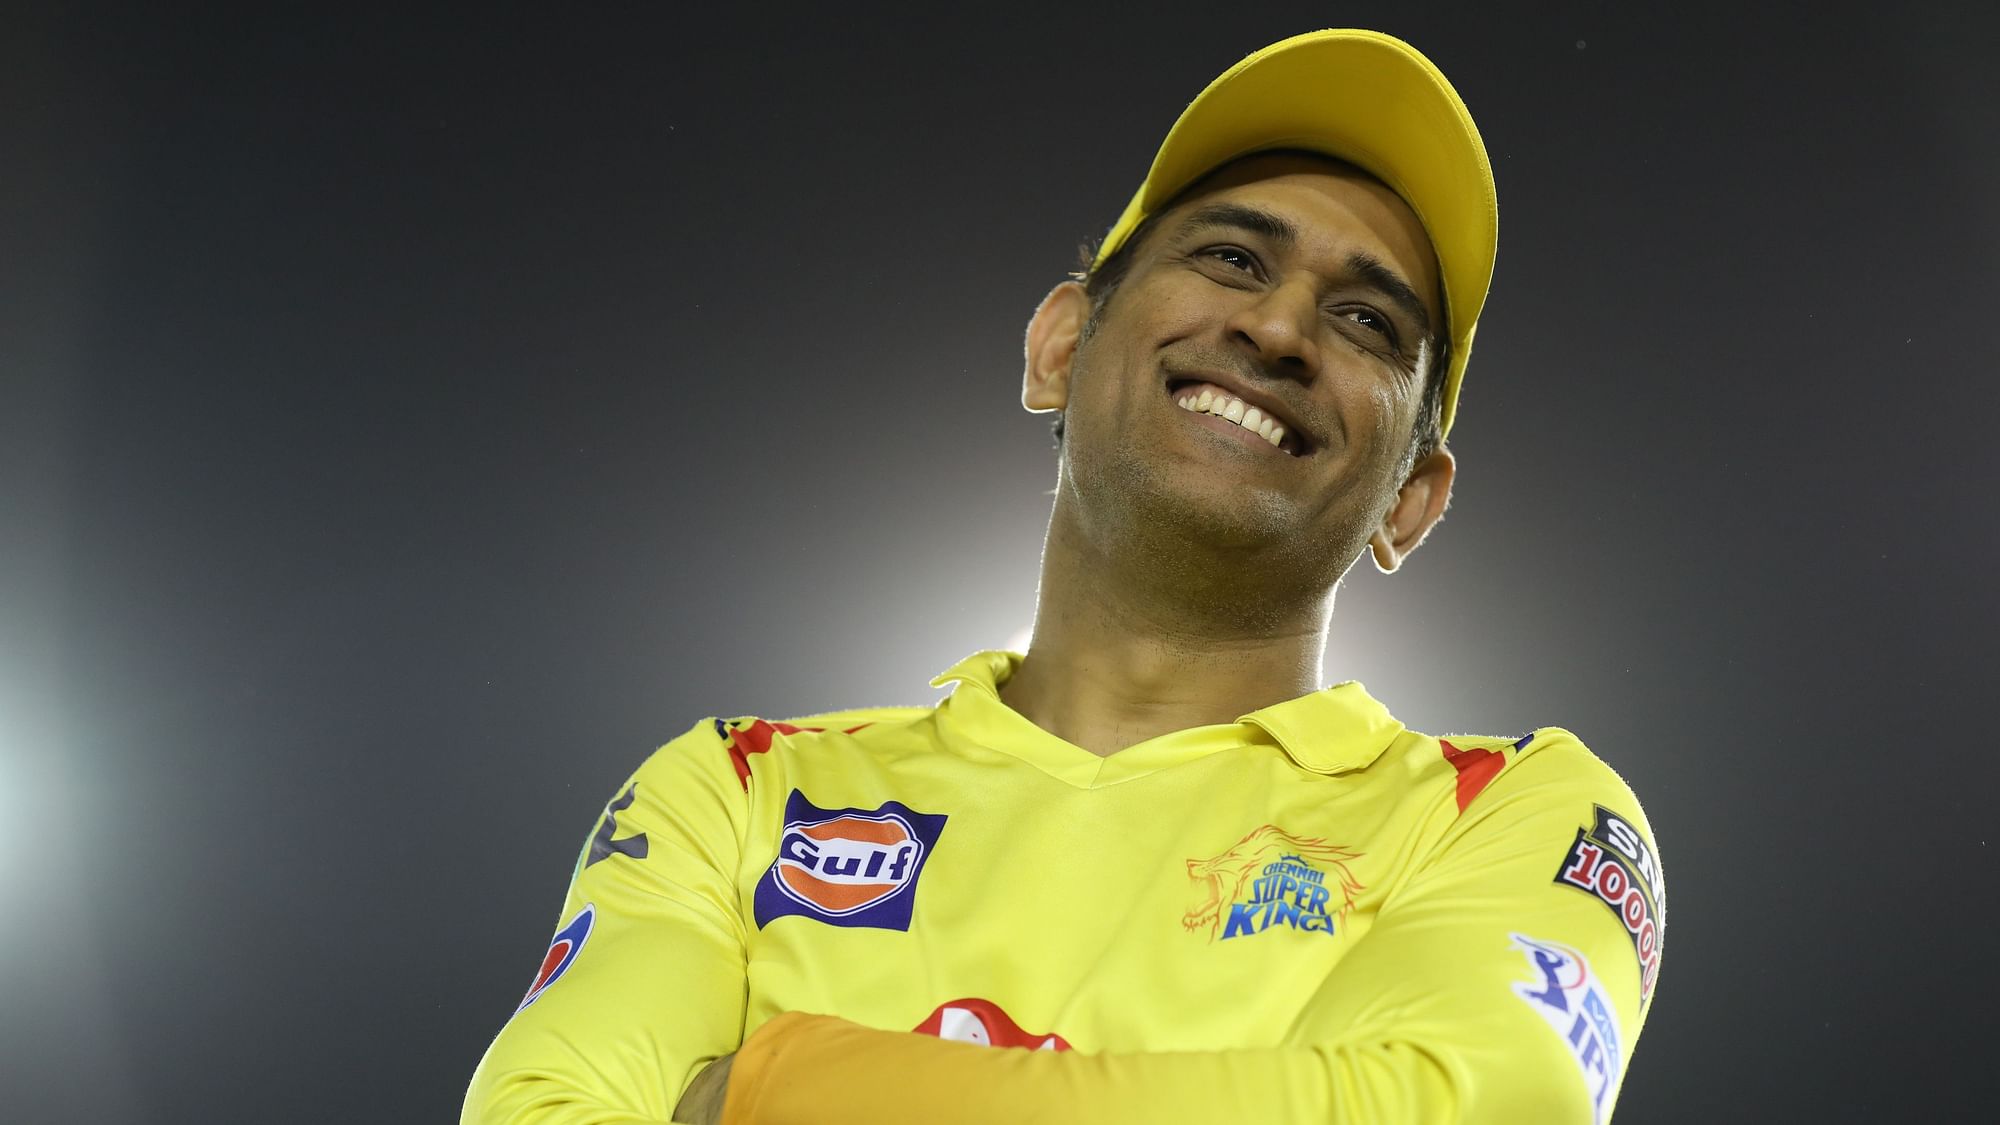 Scott Styris believes in IPL matches between CSK and MI, Dhoni owns Malinga.